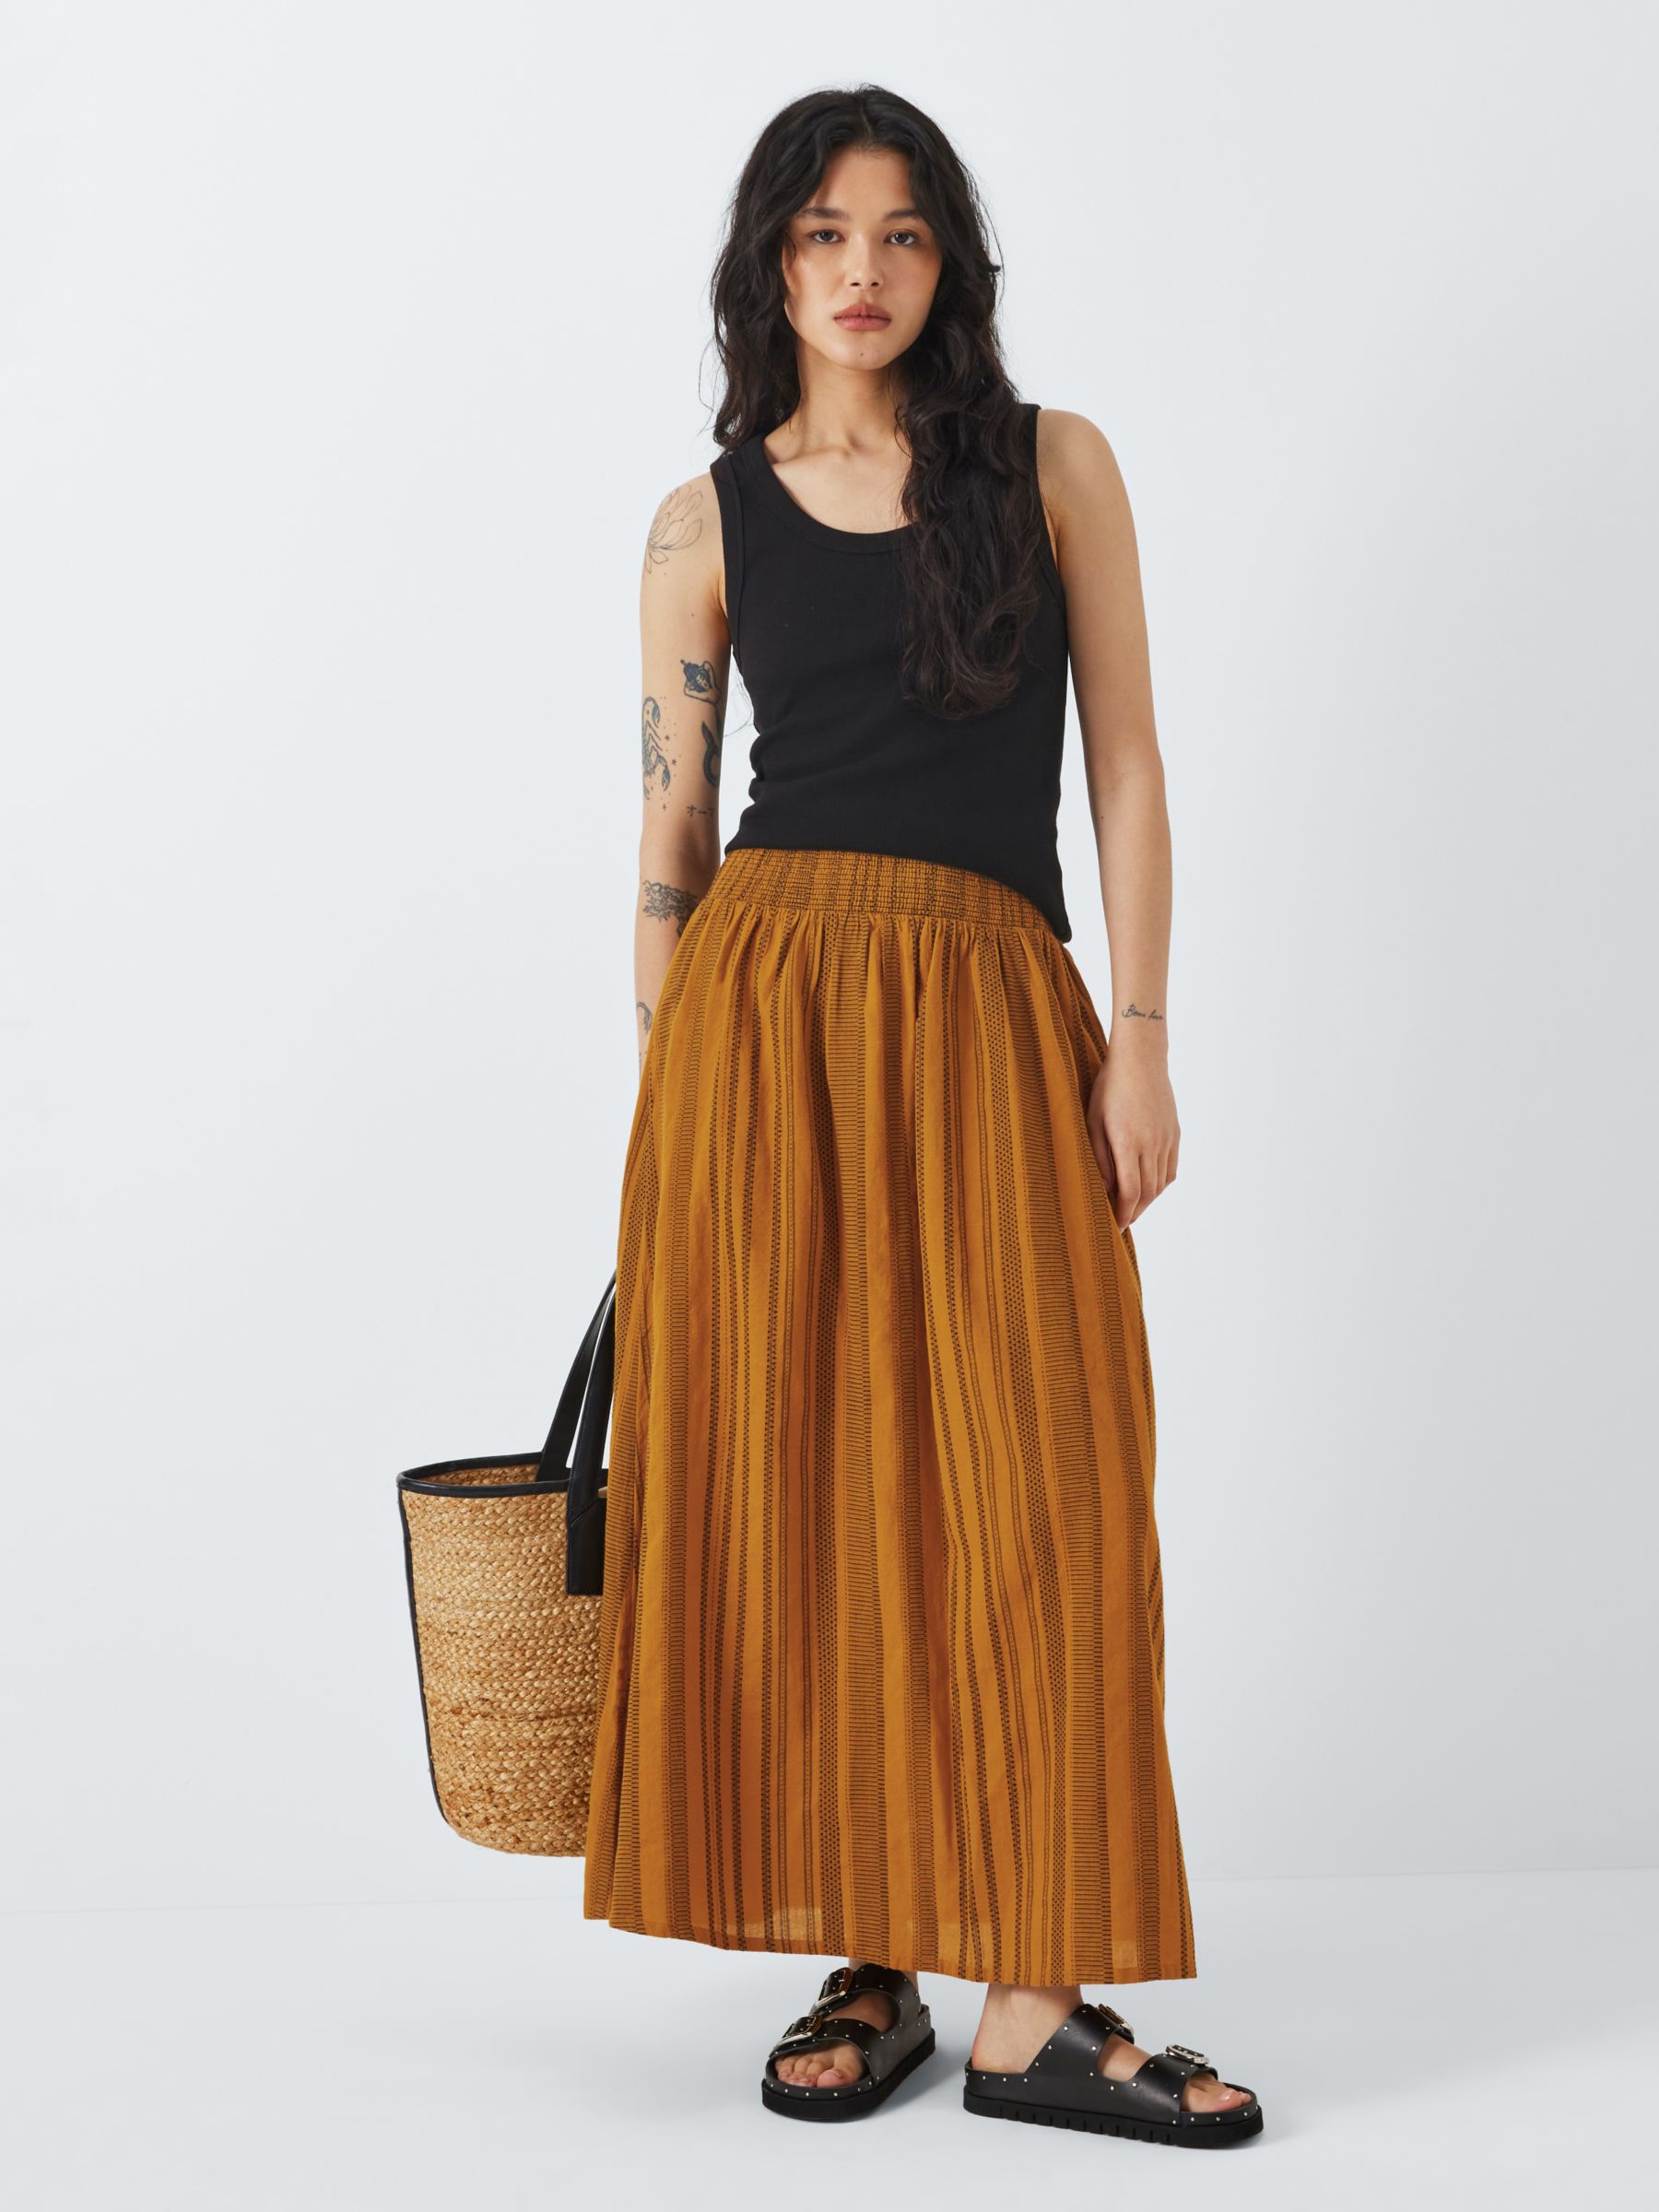 Buy AND/OR Phoenix Jacquard Stripe Skirt, Yellow Online at johnlewis.com